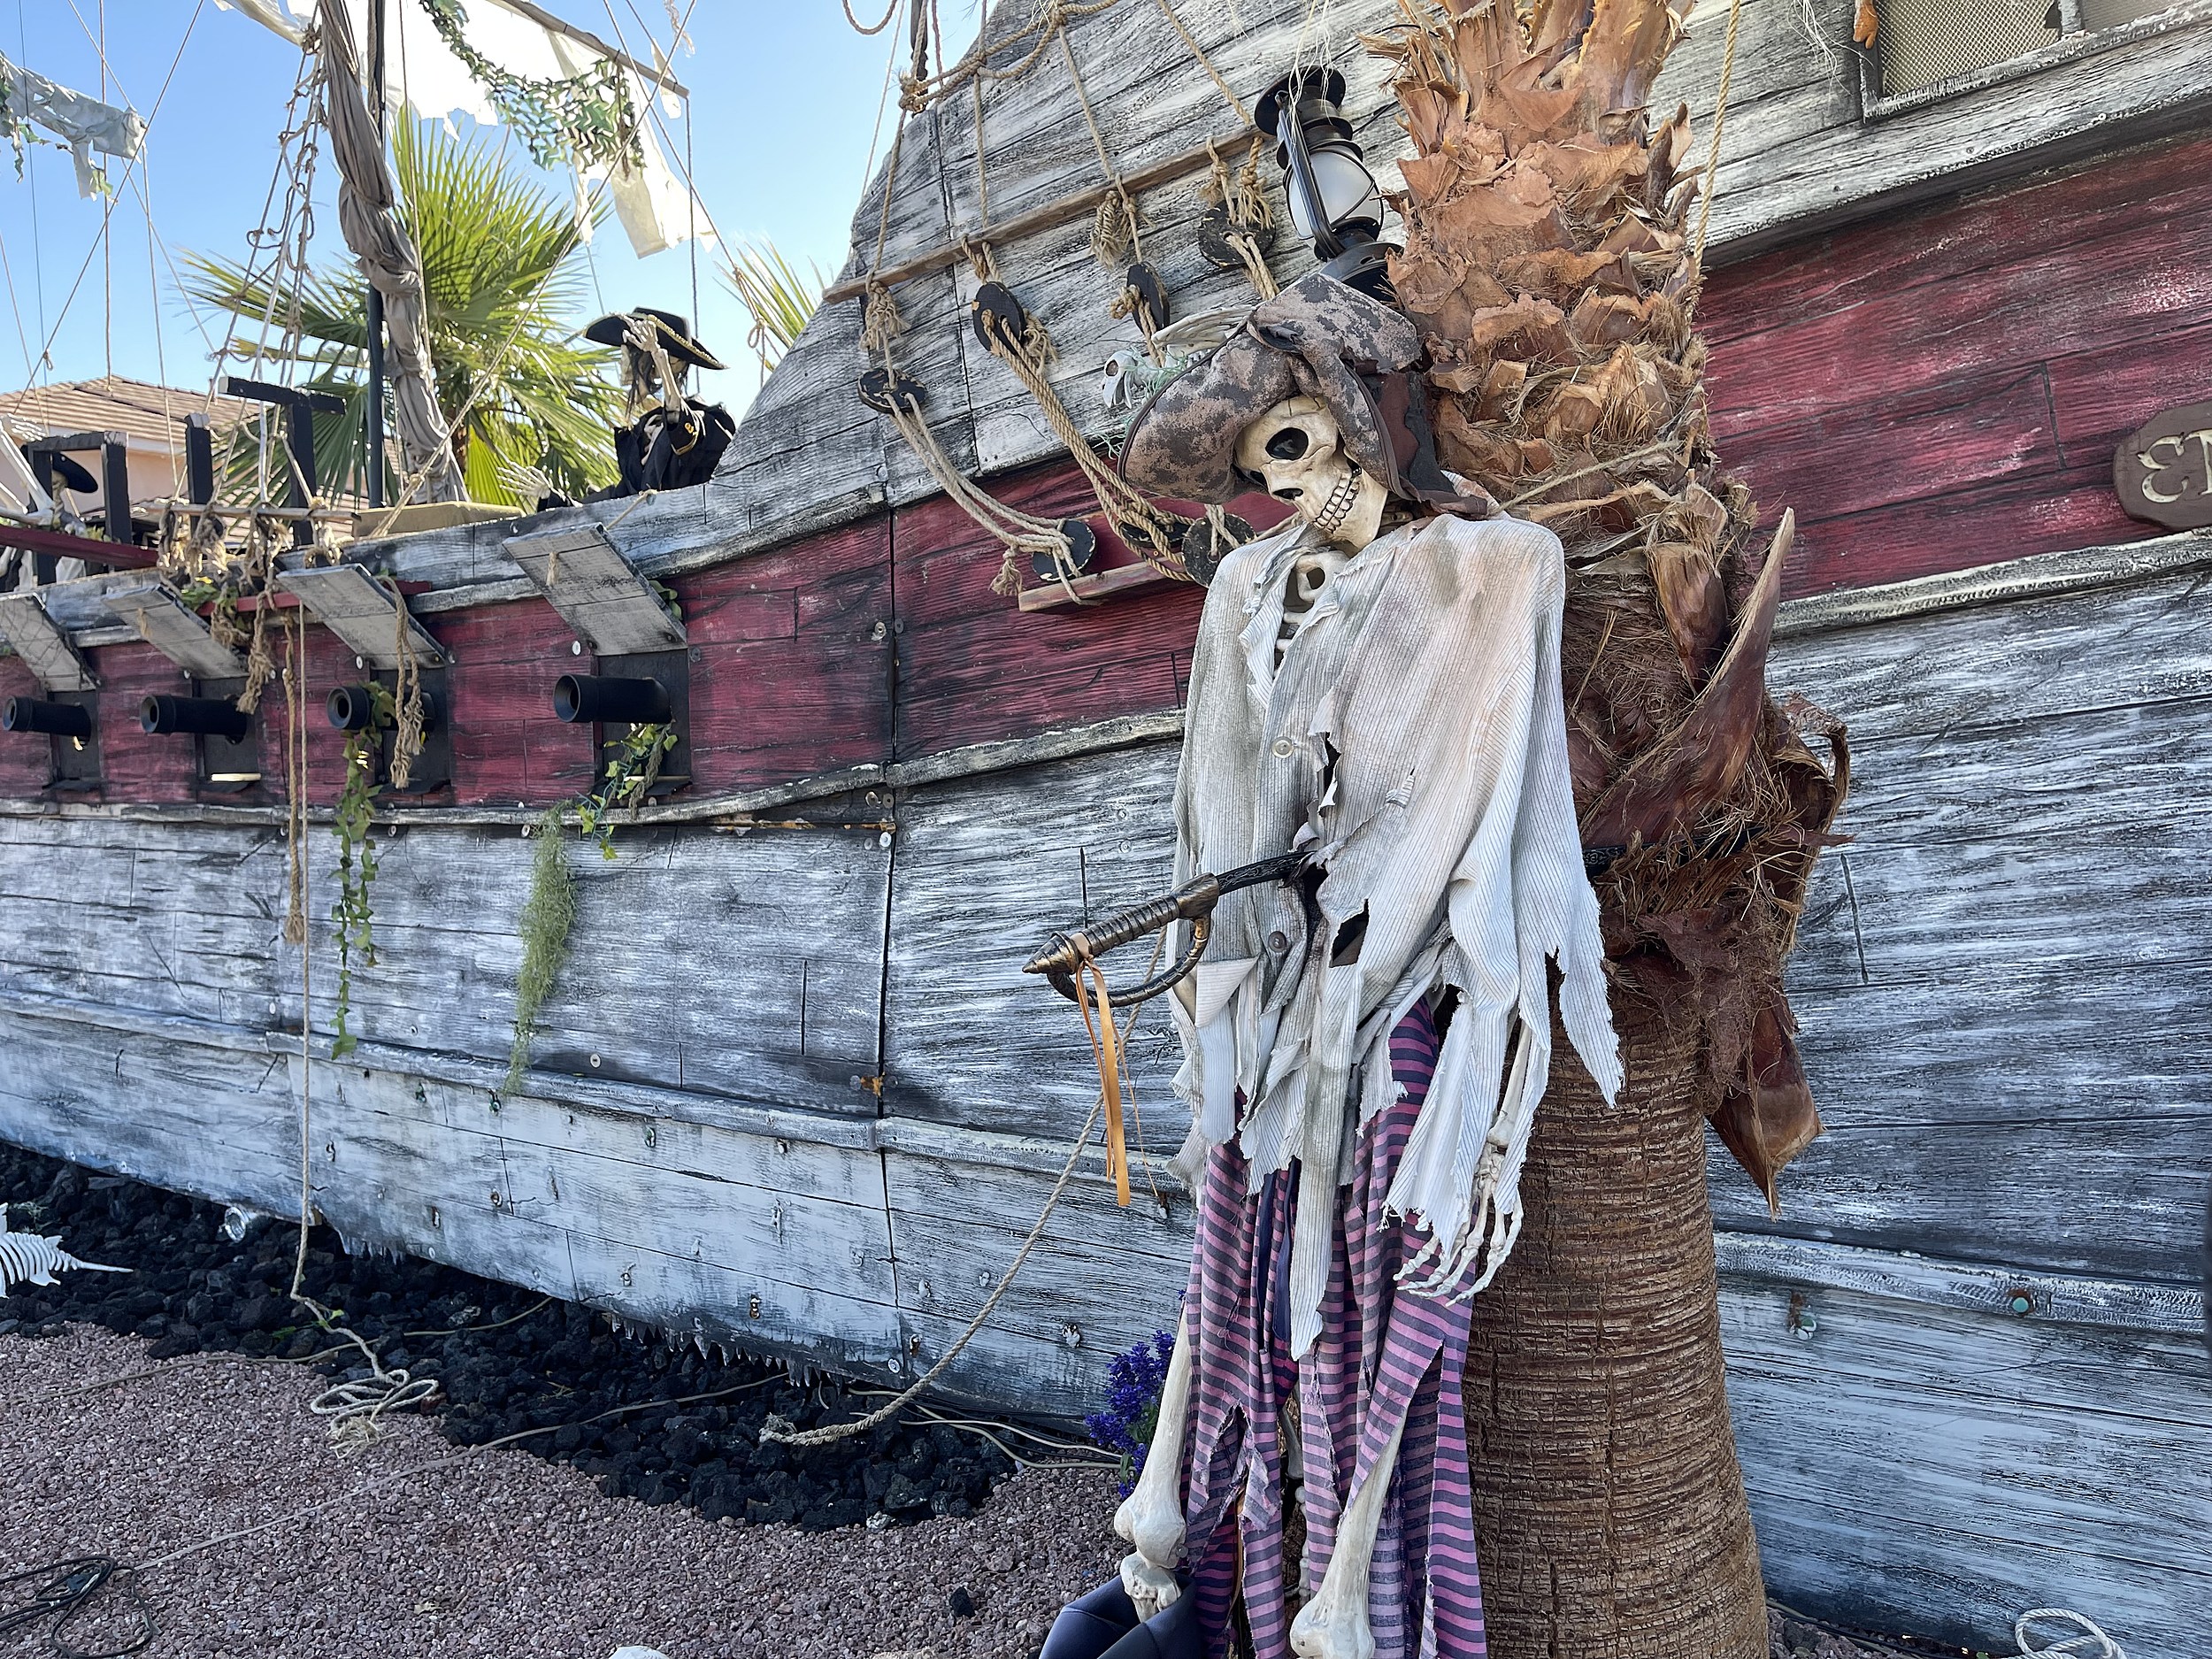 Check out this EPIC Halloween Pirate Ship in Utah!